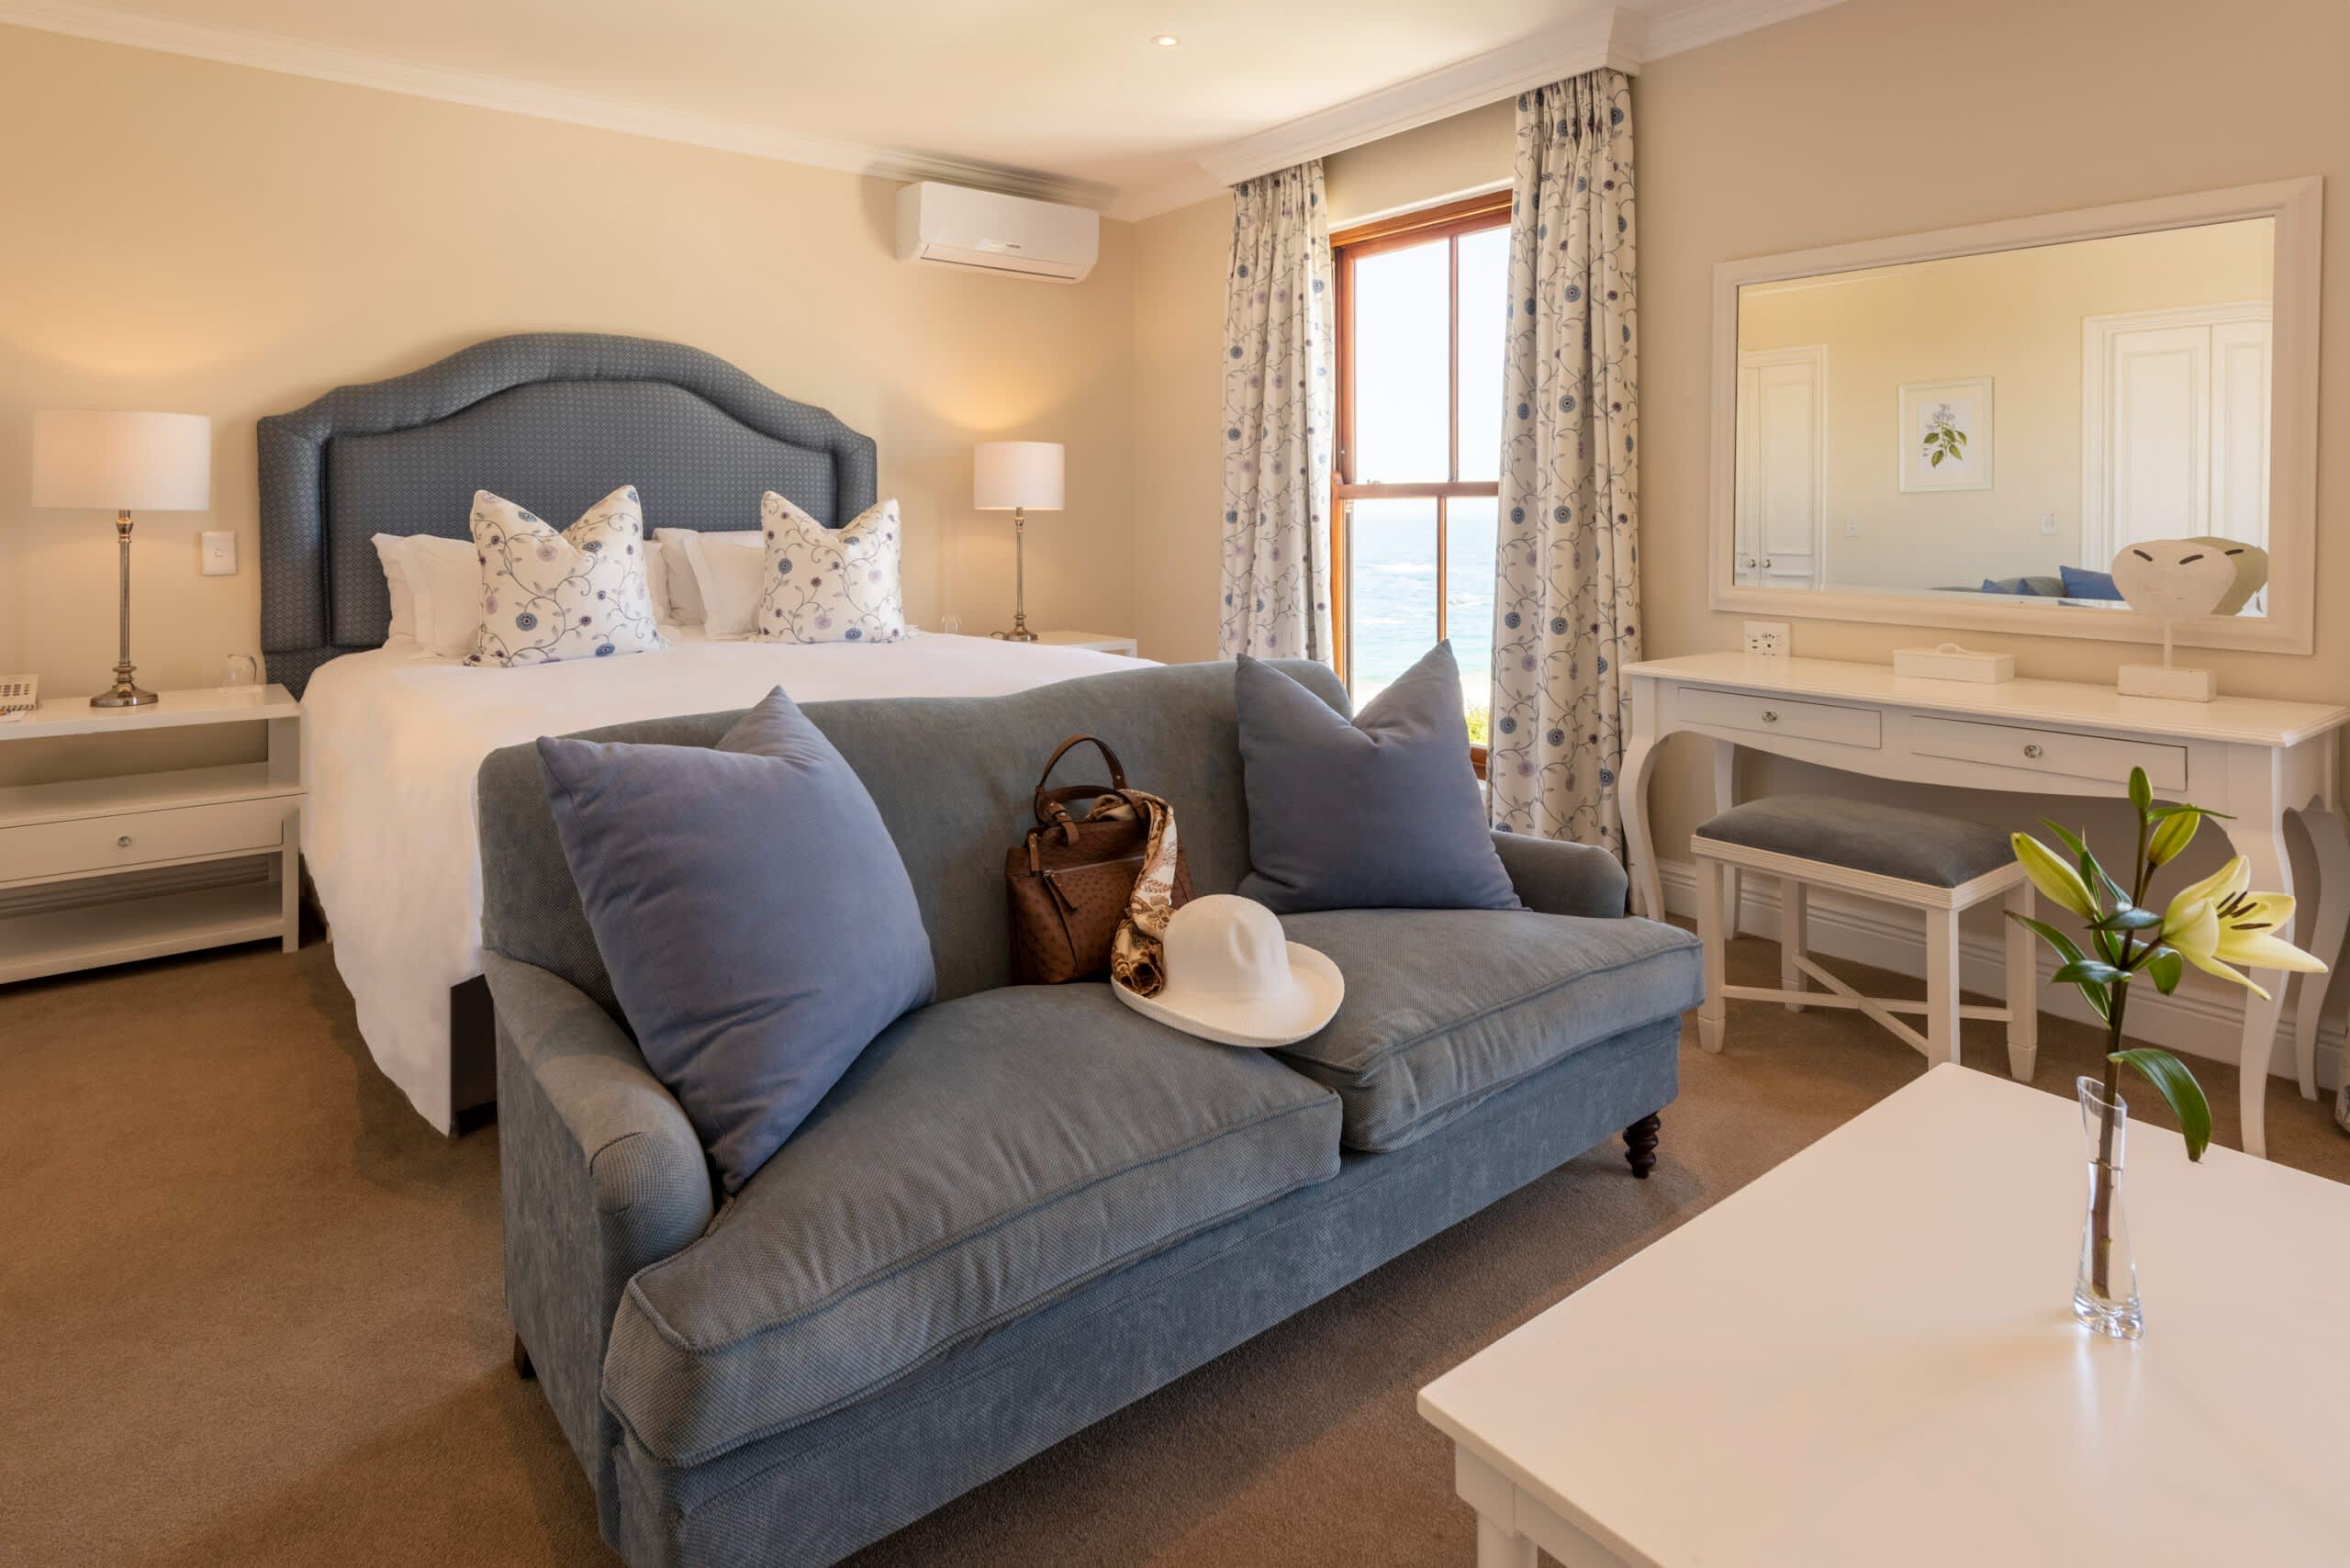 THE PLETTENBERG, Garden Route: 1 Night Stay for 2 people Sharing + Breakfast + Welcome Drink & STAY + PAY OFFERS AVAILABLE!